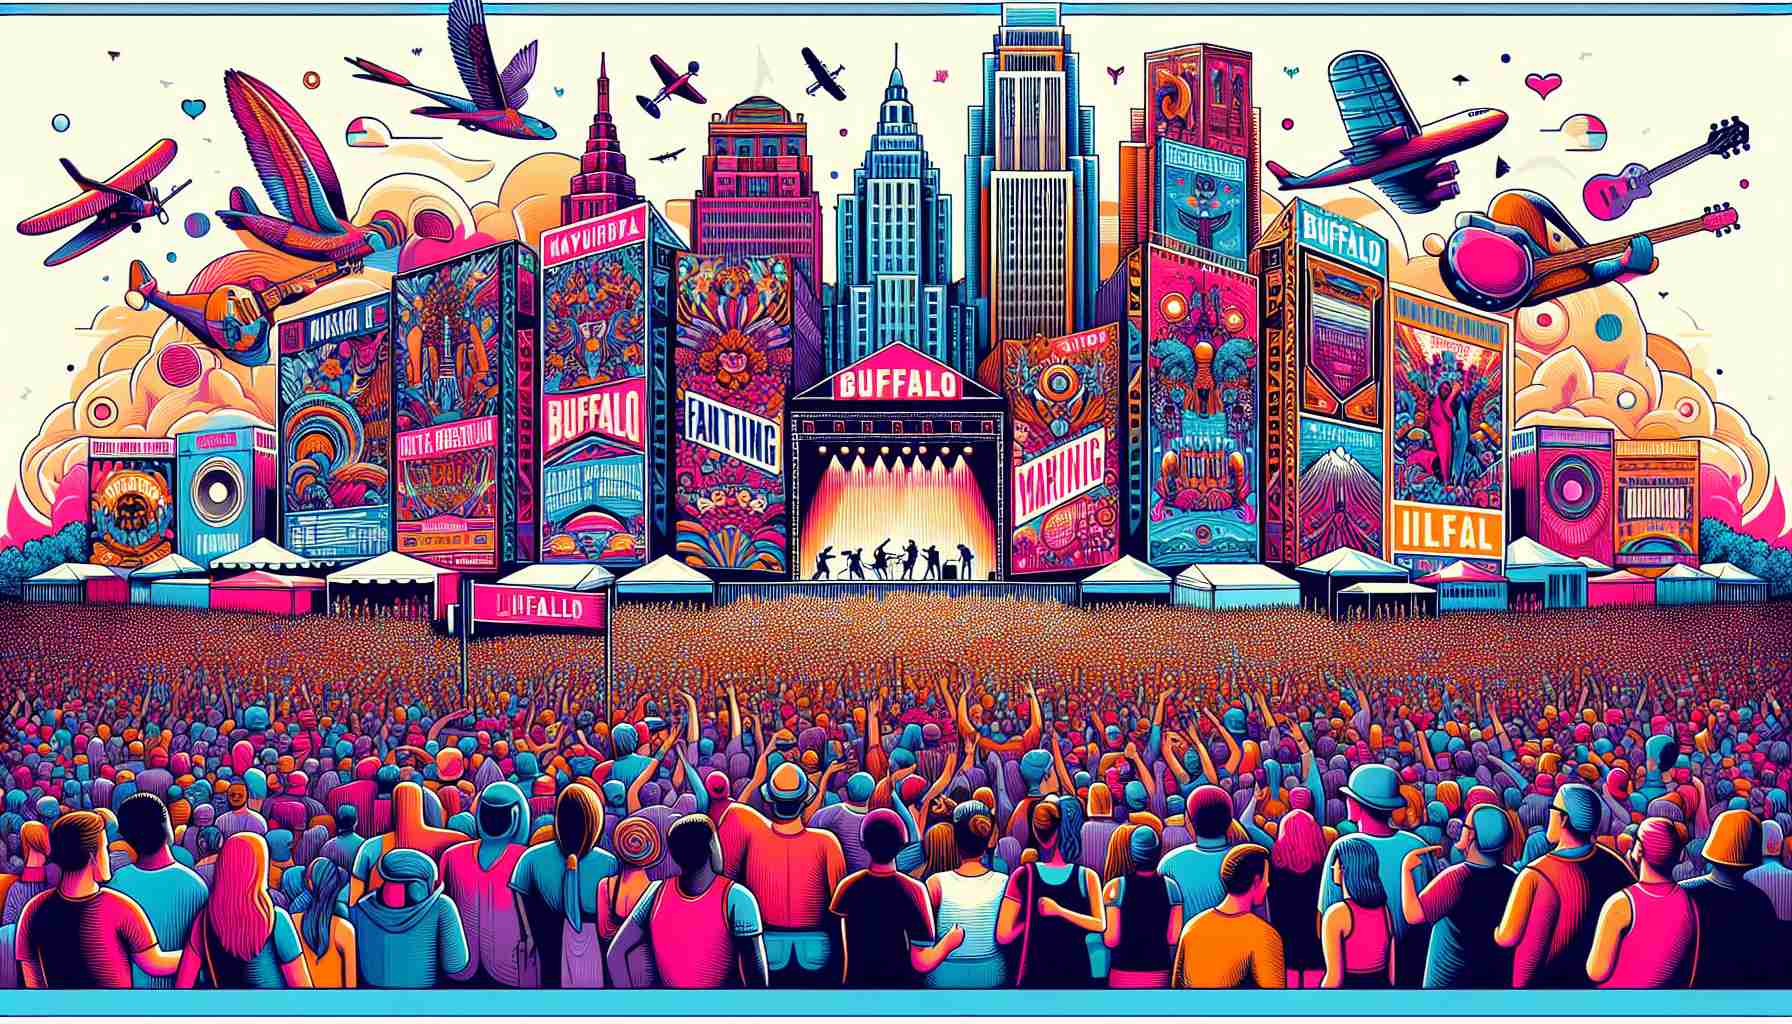 An exciting visual representation of a lineup for future music festivals in Buffalo, NY. Fill the scene with imaginatively designed banners showcasing a range of diverse genres of music. Showcase the joyful atmosphere with the crowd of people of different genders and descents, all eagerly anticipating the performances. Incorporate iconic landmarks of Buffalo such as cityscape with its historic buildings. The scene should be imbued with vibrant colors and high contrast to convey the vibrant energy of a music festival.